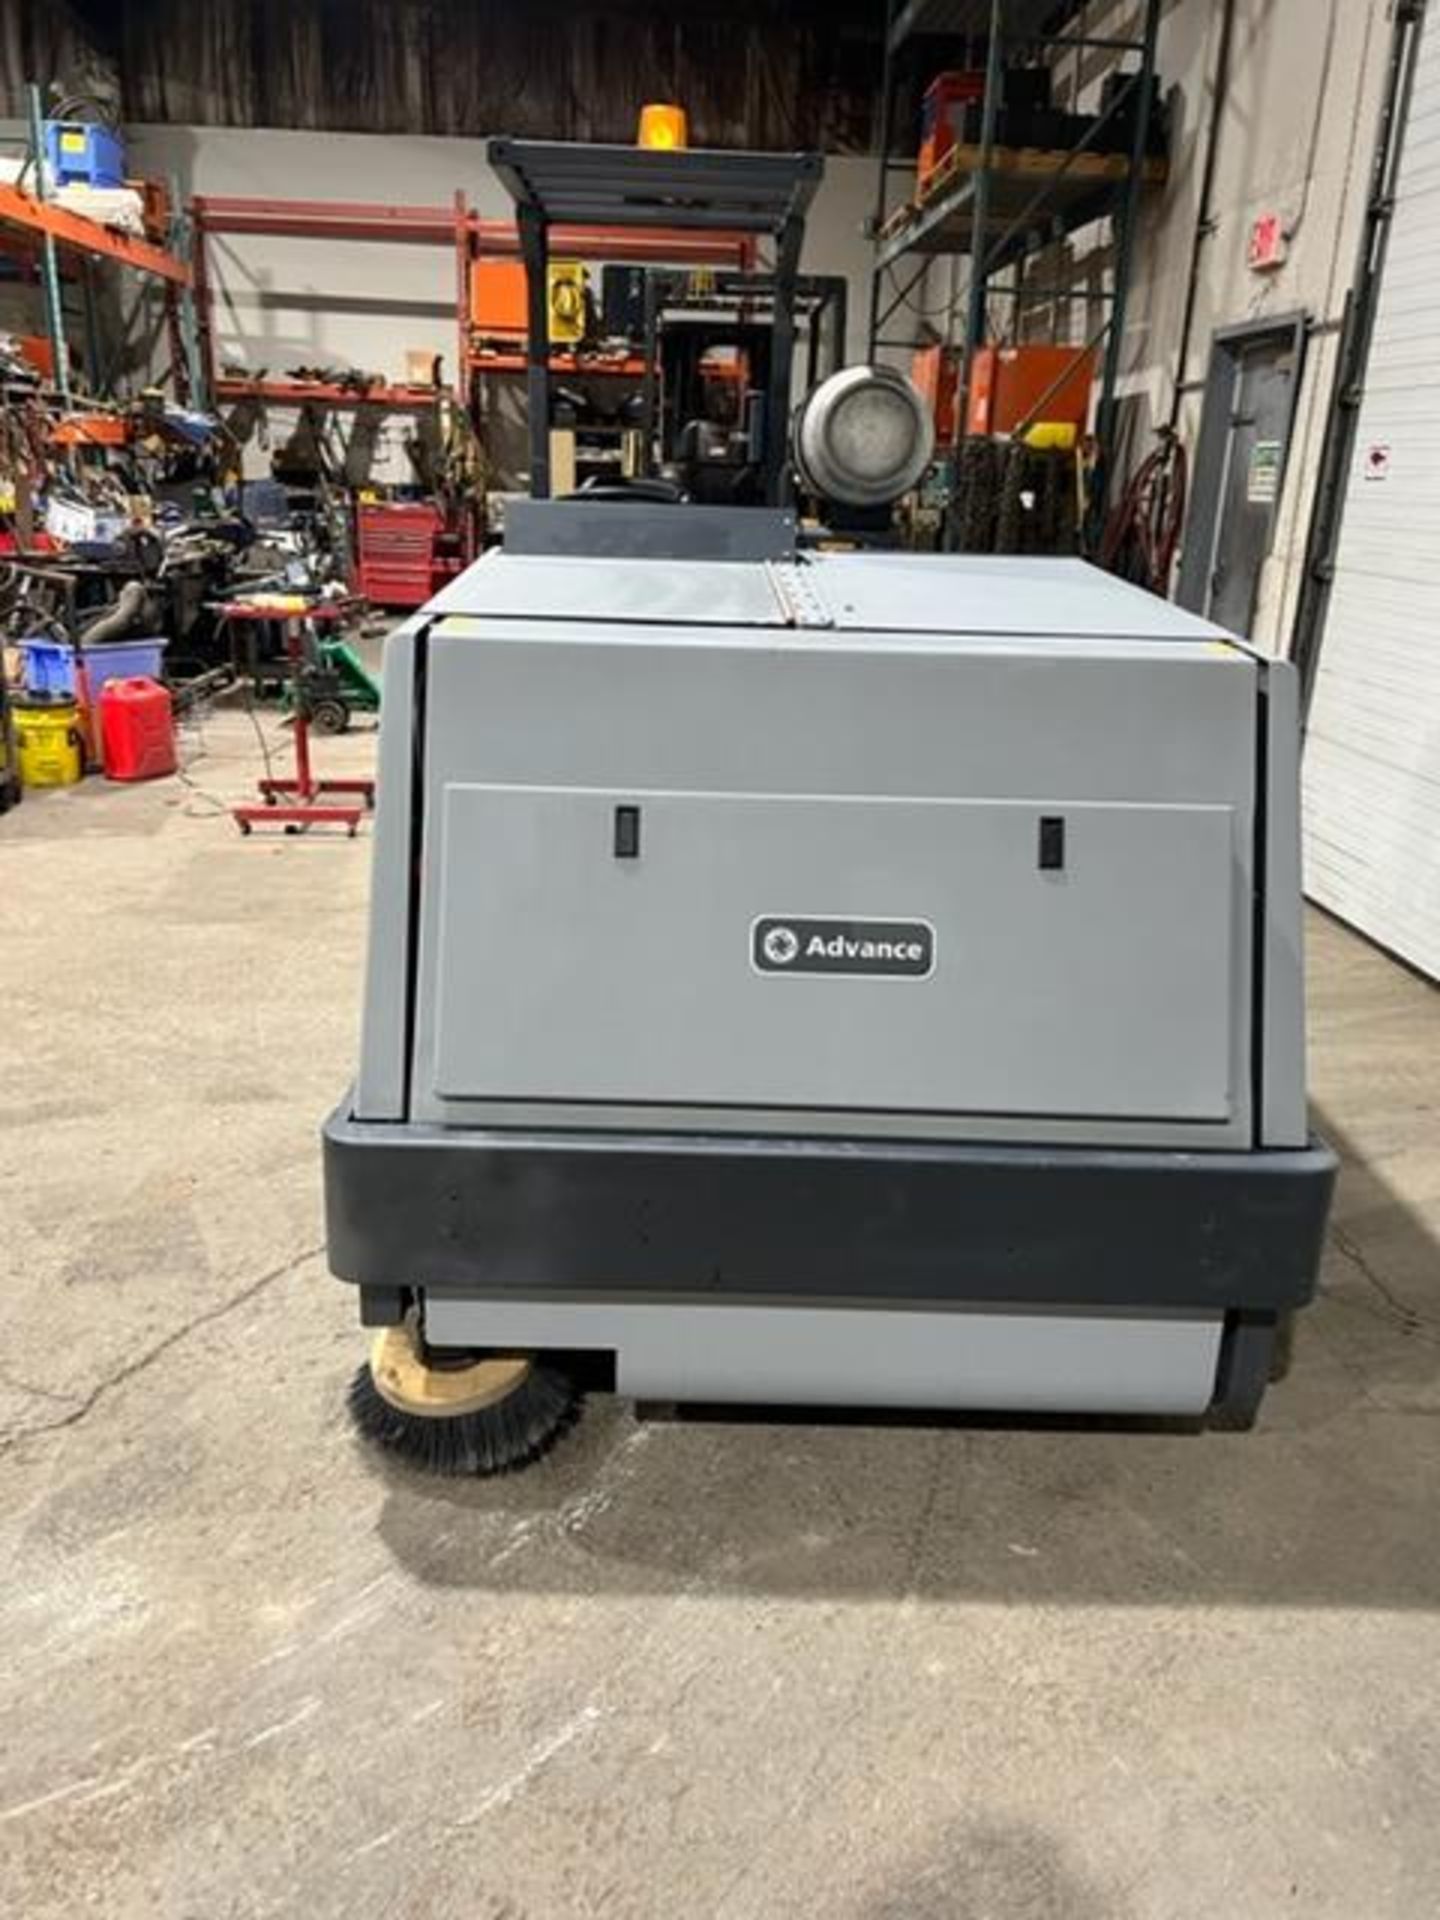 2014 Nilfisk Advance Model 7765 Floor Cleaning Machine Sweeper Scrubber Unit LPG (propane) with - Image 4 of 6